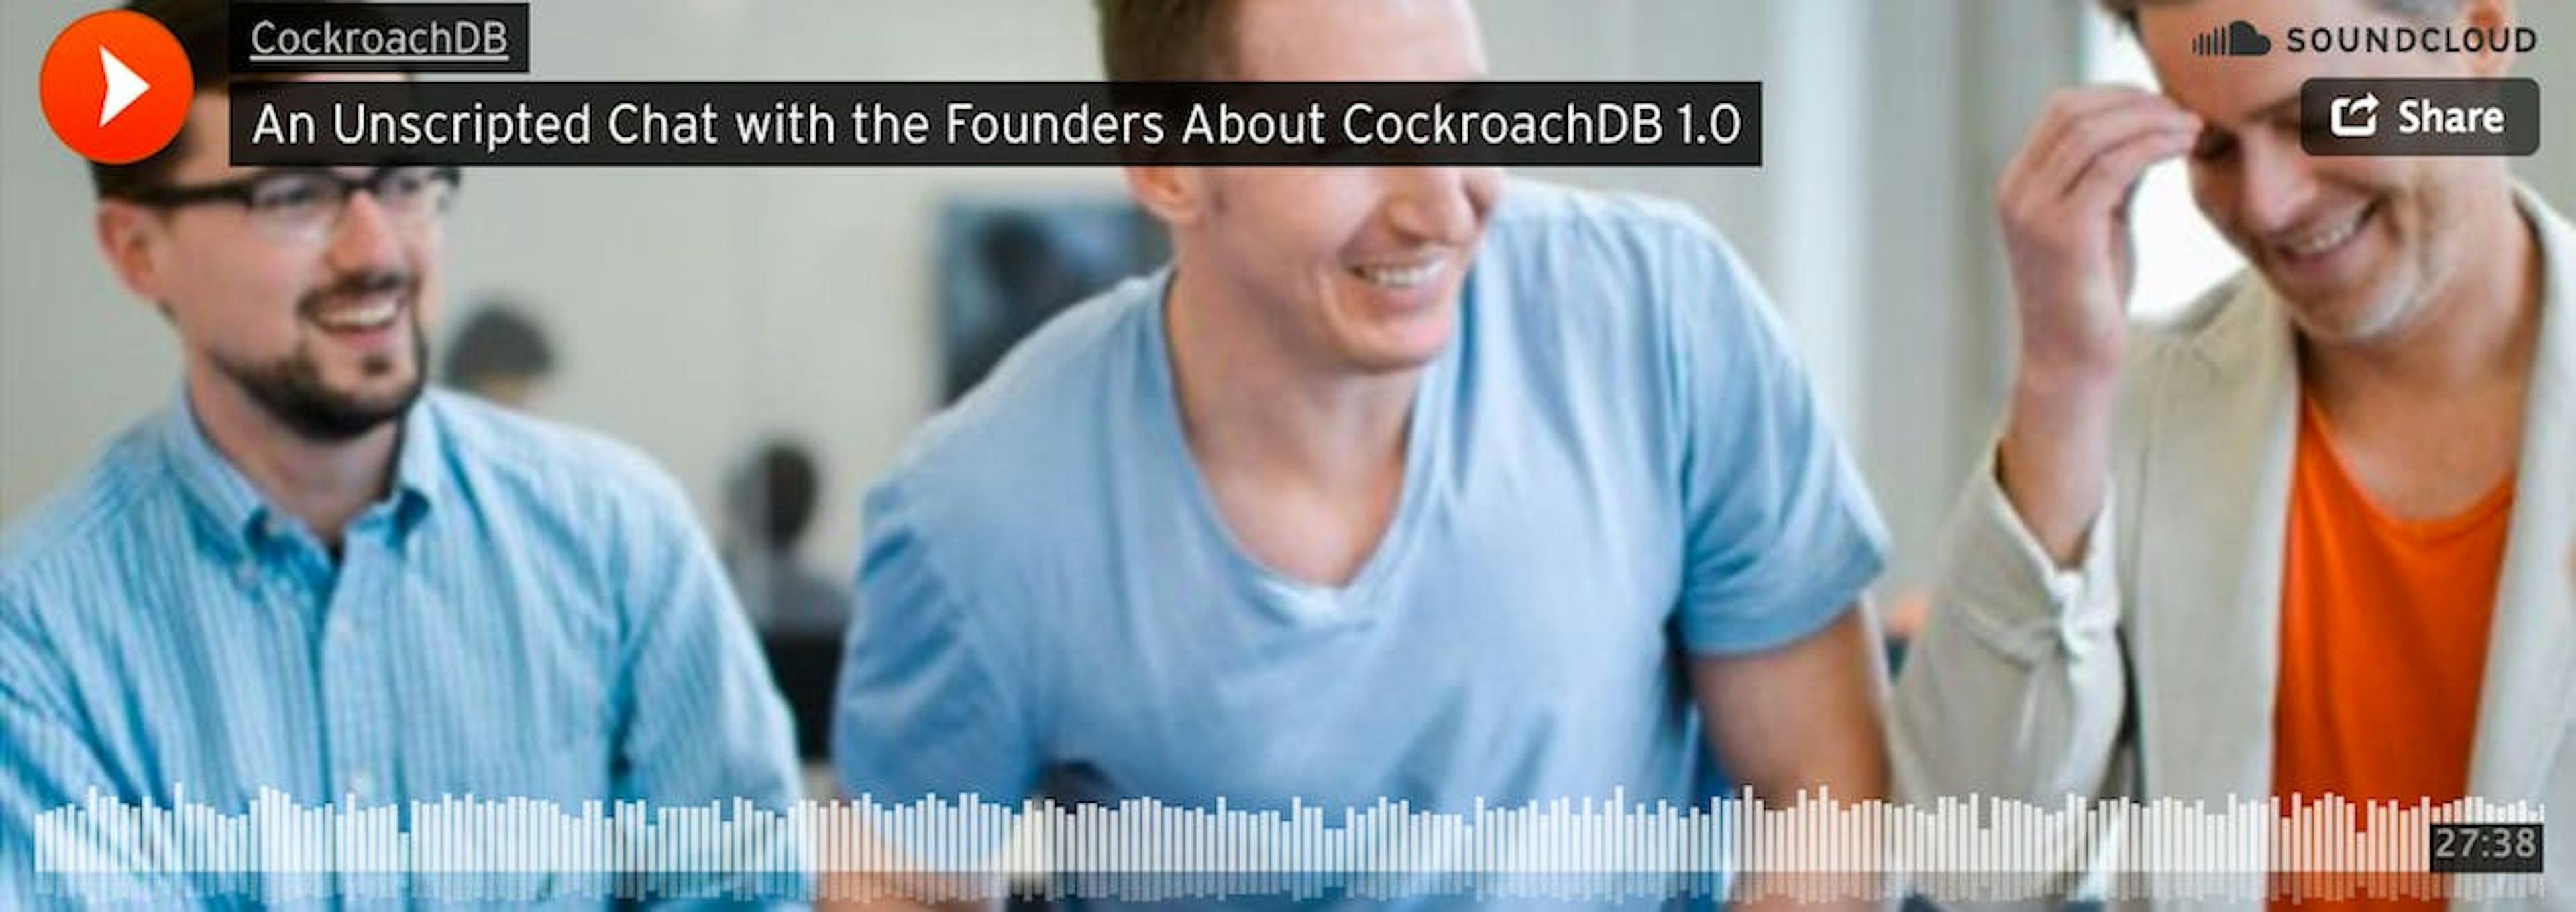 podcast-cockroachlabs-unscripted-founders-1dot0-1